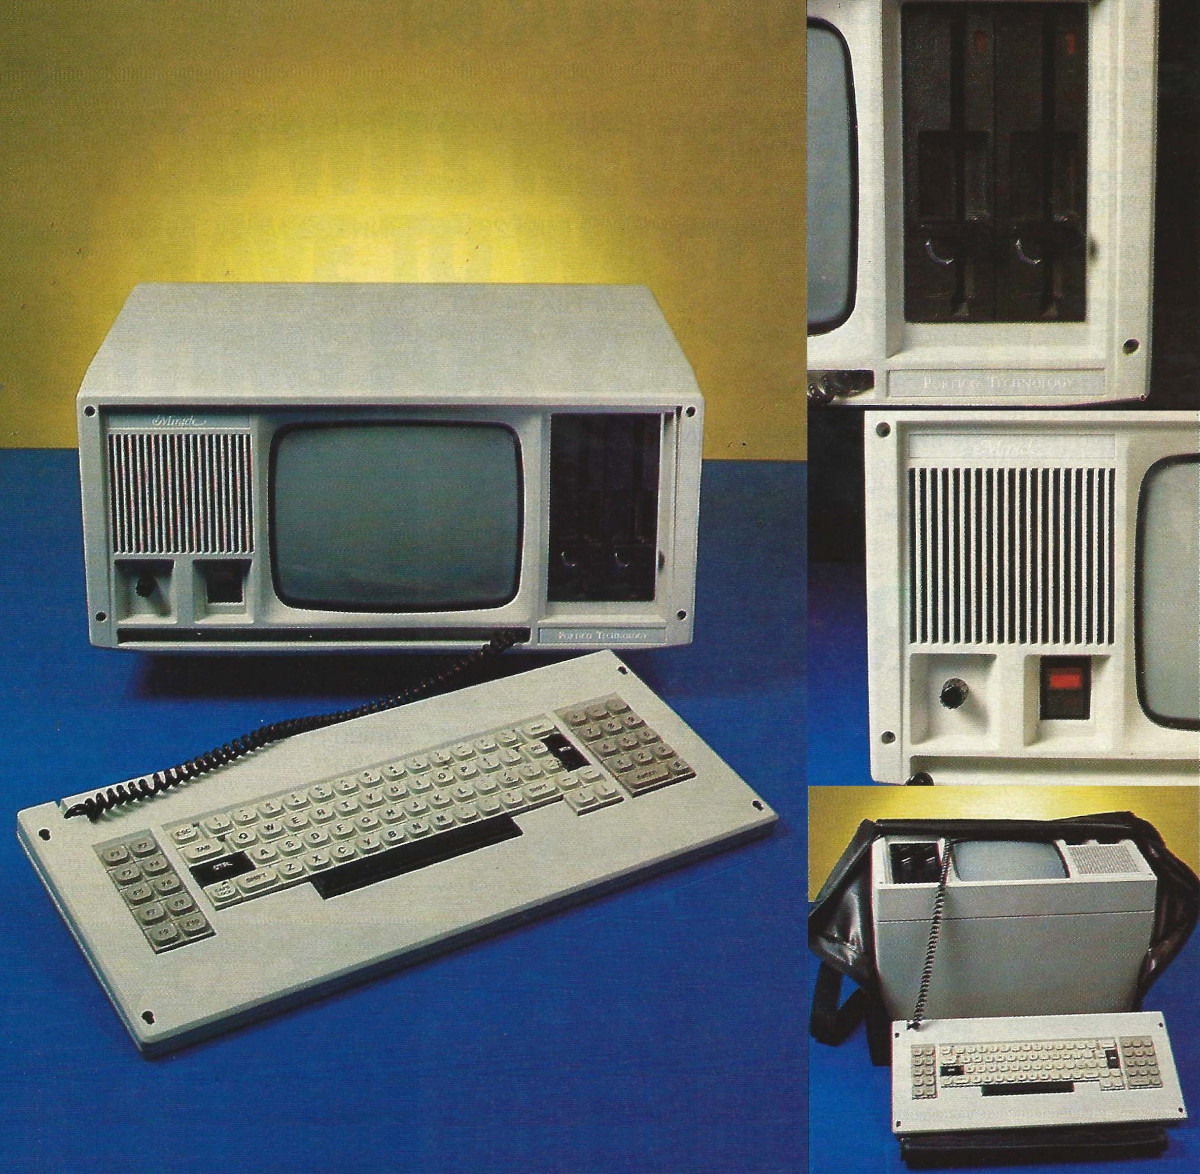 A collage of photos from a review of the Miracle in September 22nd 1983's edition of Personal Computer News